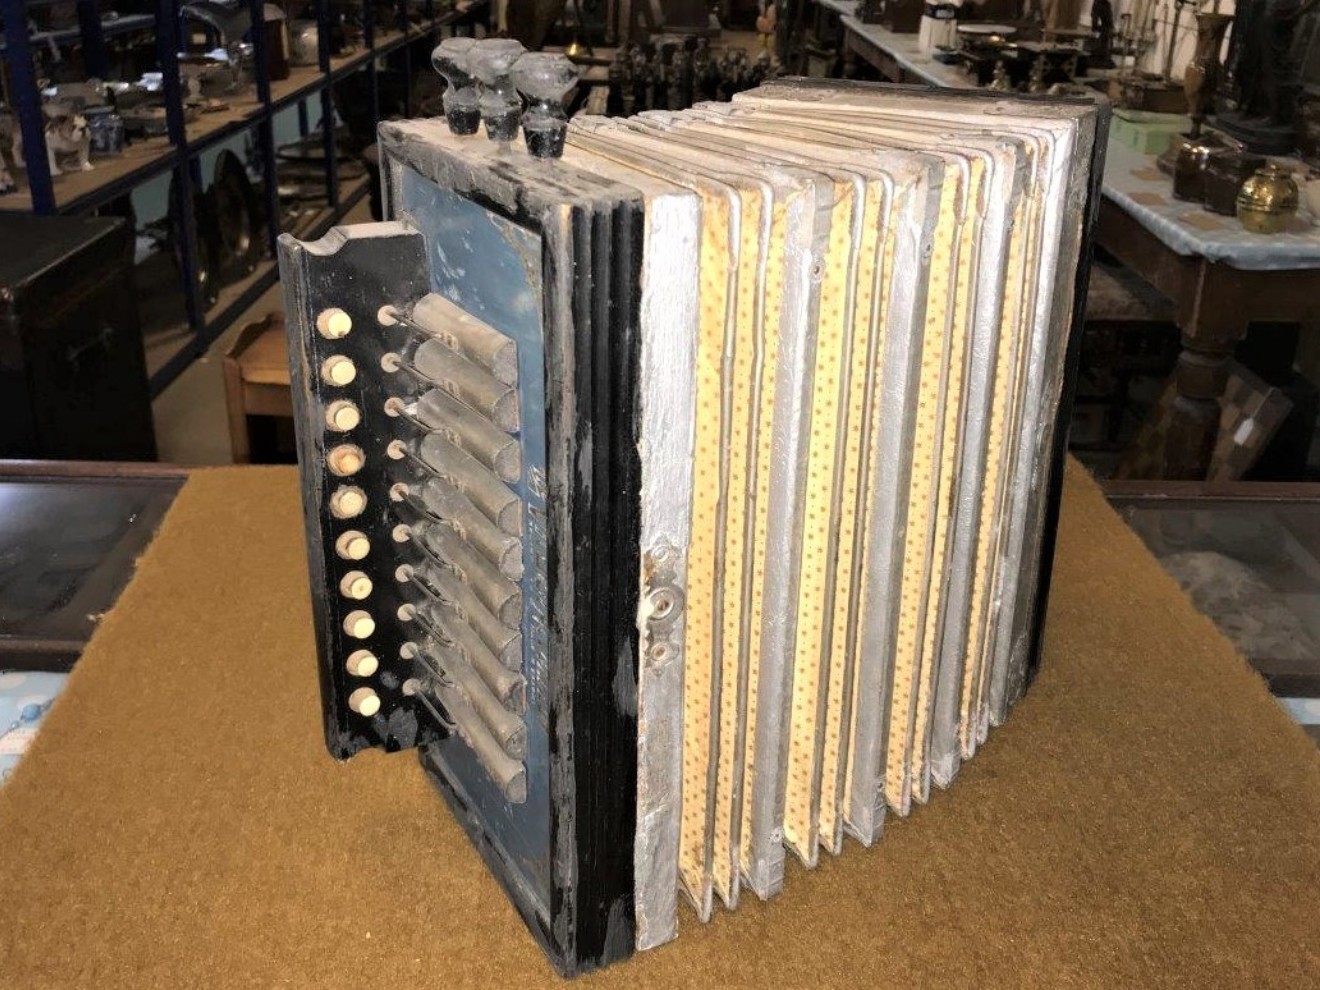 The Viceroy Accordion